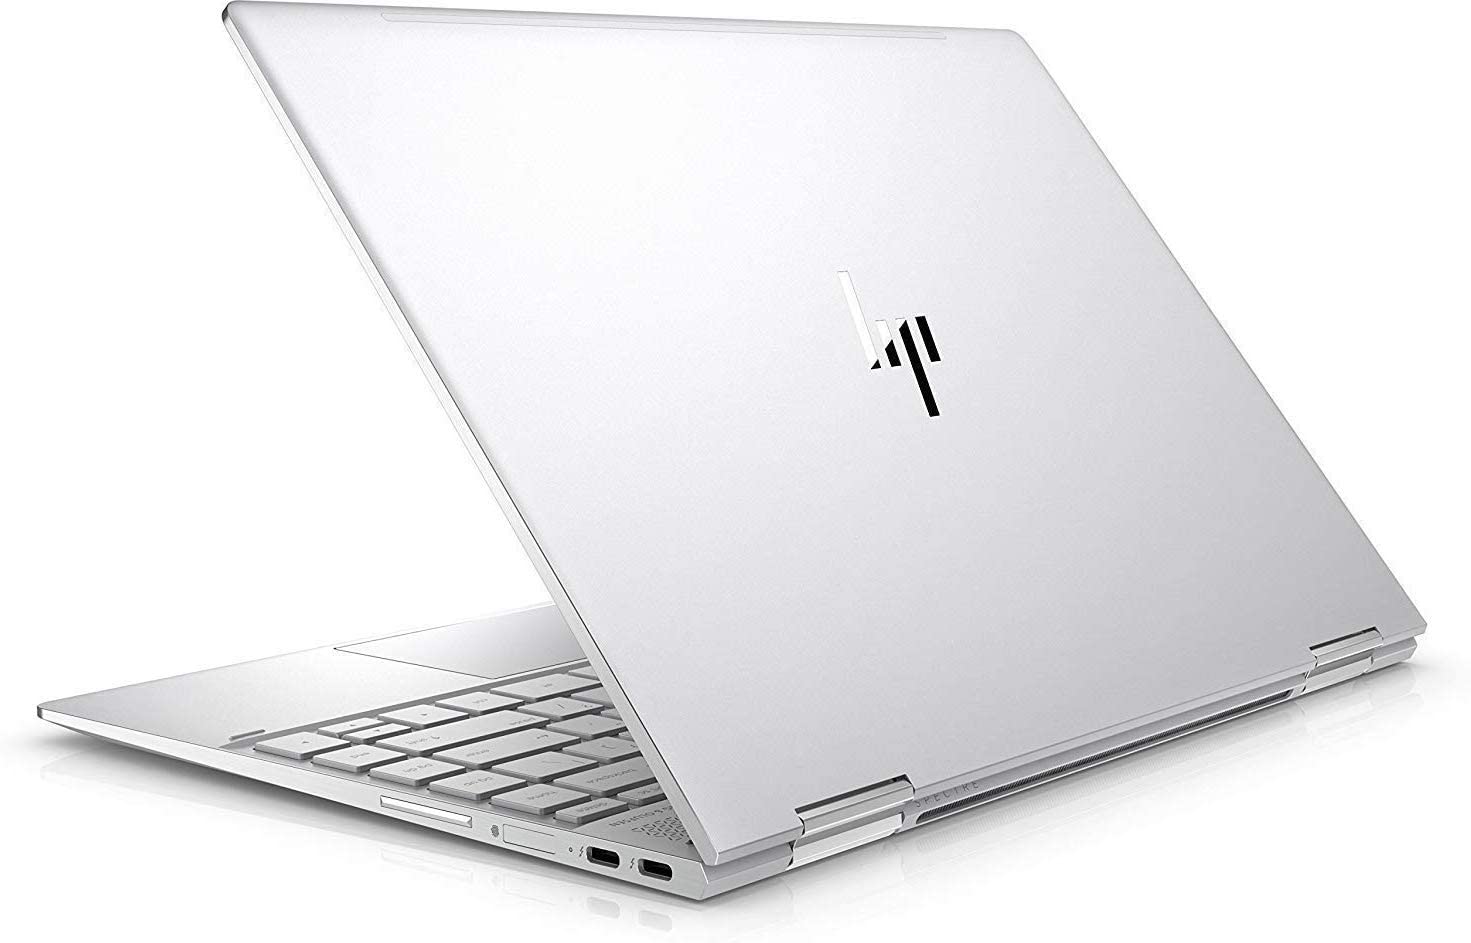 Best HP Laptop for College Students | 2020 Reviews